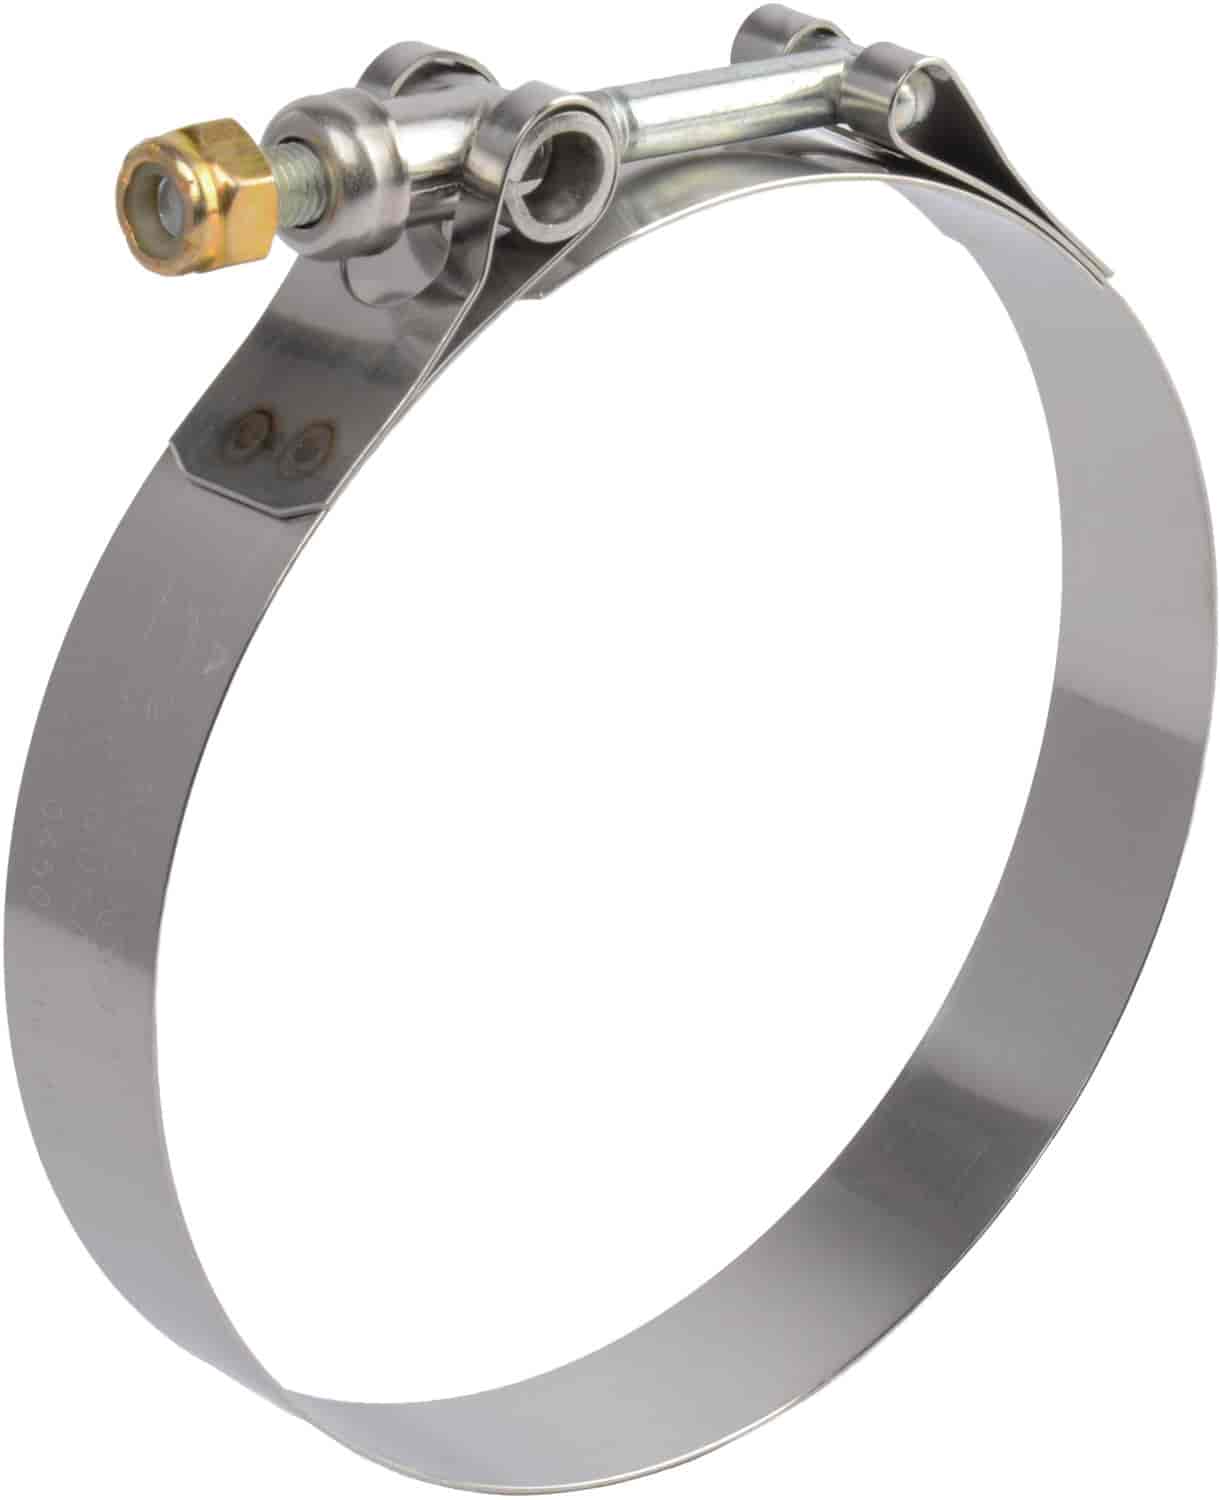 T-Bolt Hose Clamp 4.280" to 4.590" ID